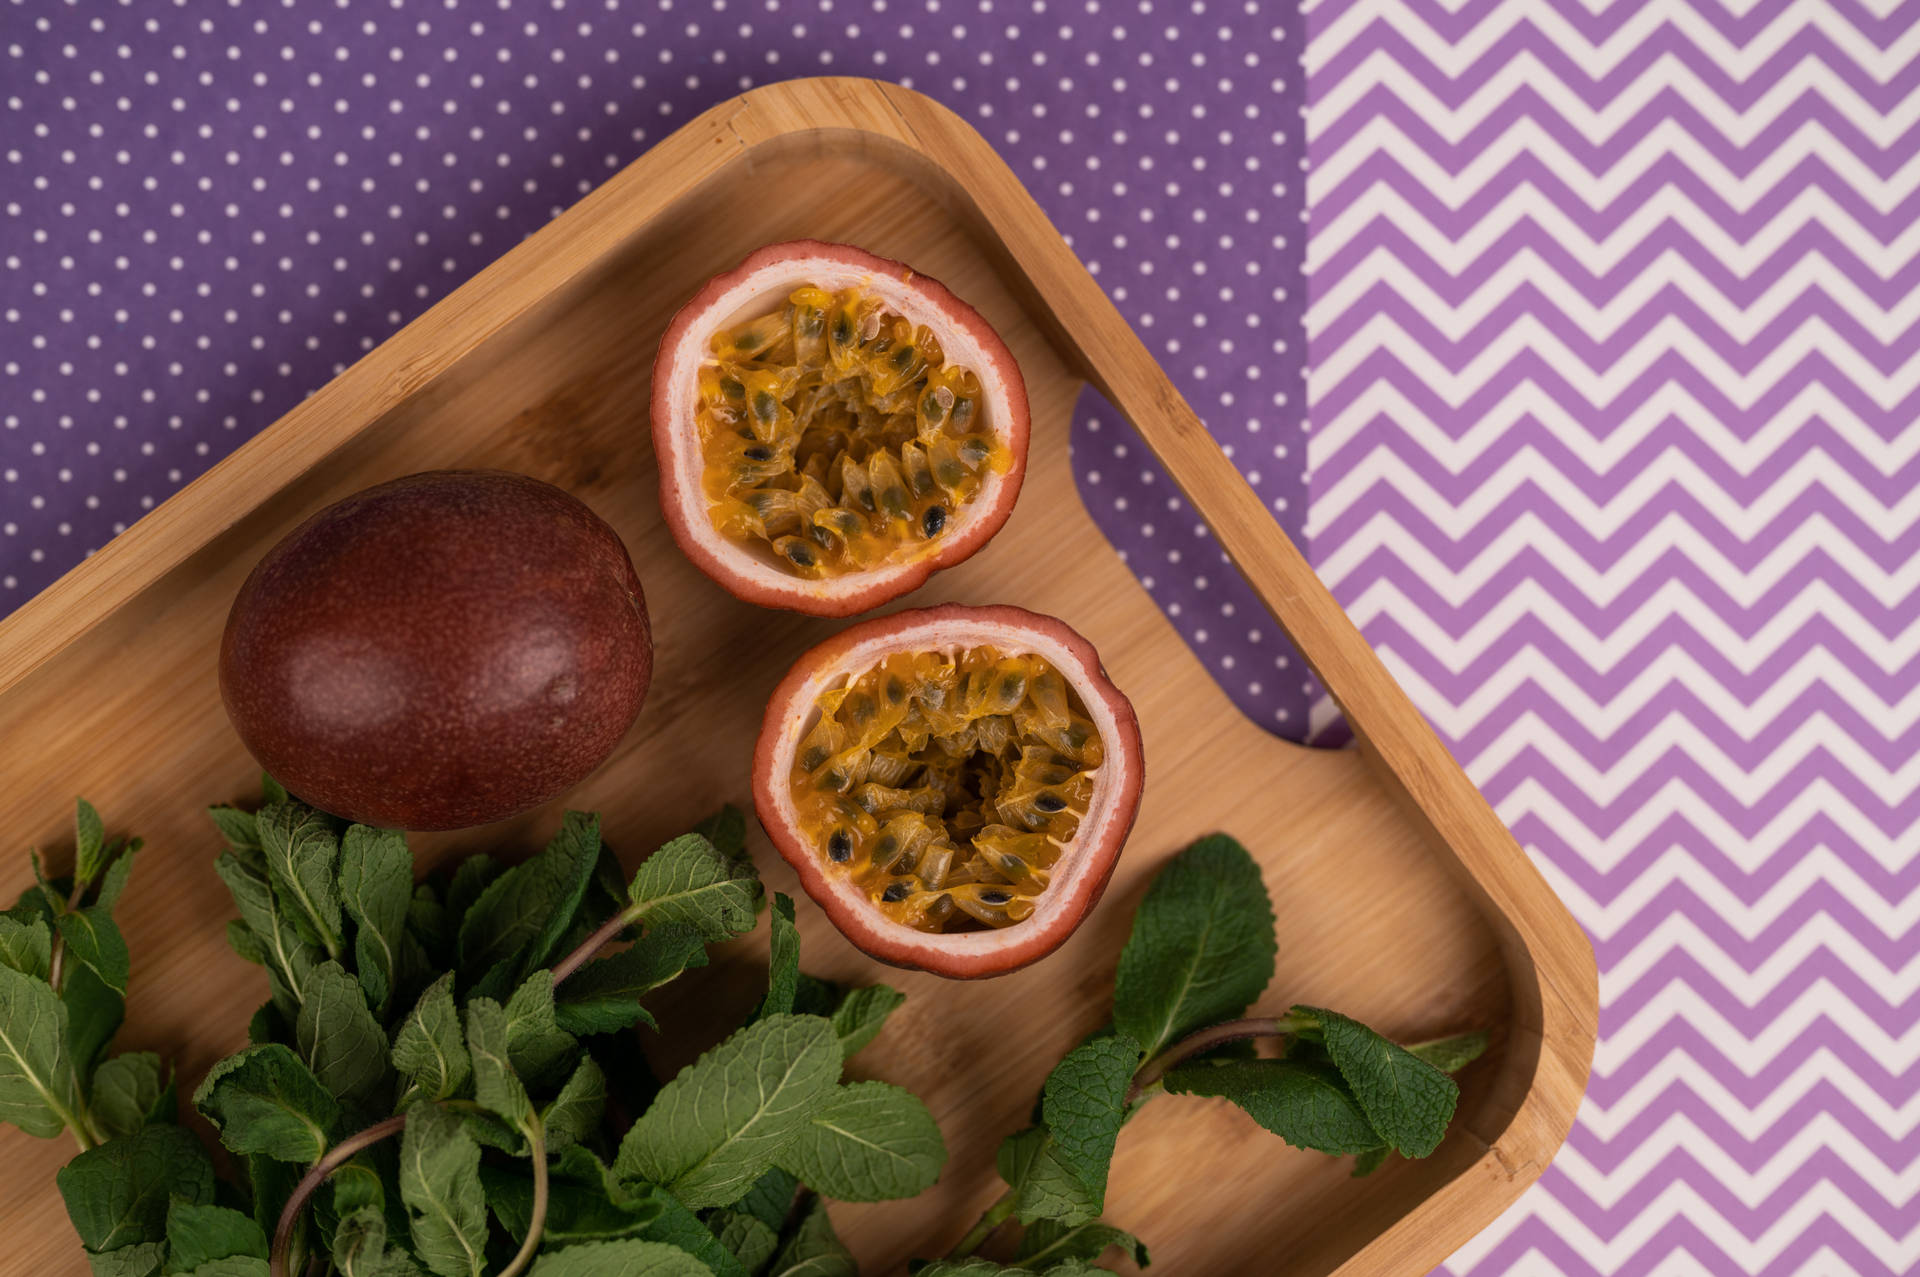 Savor the Exotic - A Freshly Sliced Passion Fruit Wallpaper